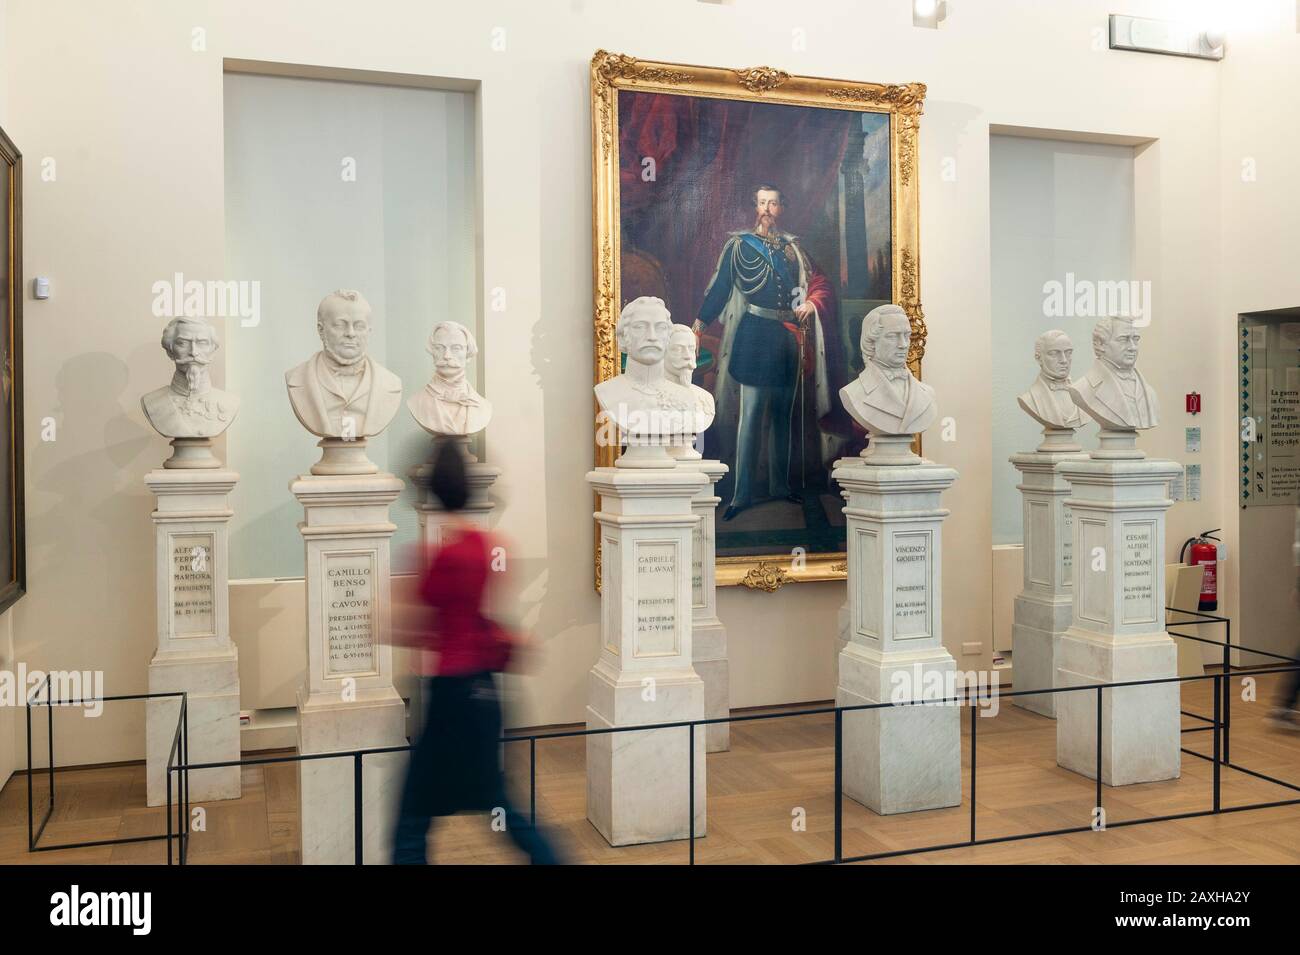 TORINO, ITALY - Museum of the Risorgimento. The King Vittorio Emanuele II of Savoia, and the busts of the protagonists at the time. Stock Photo